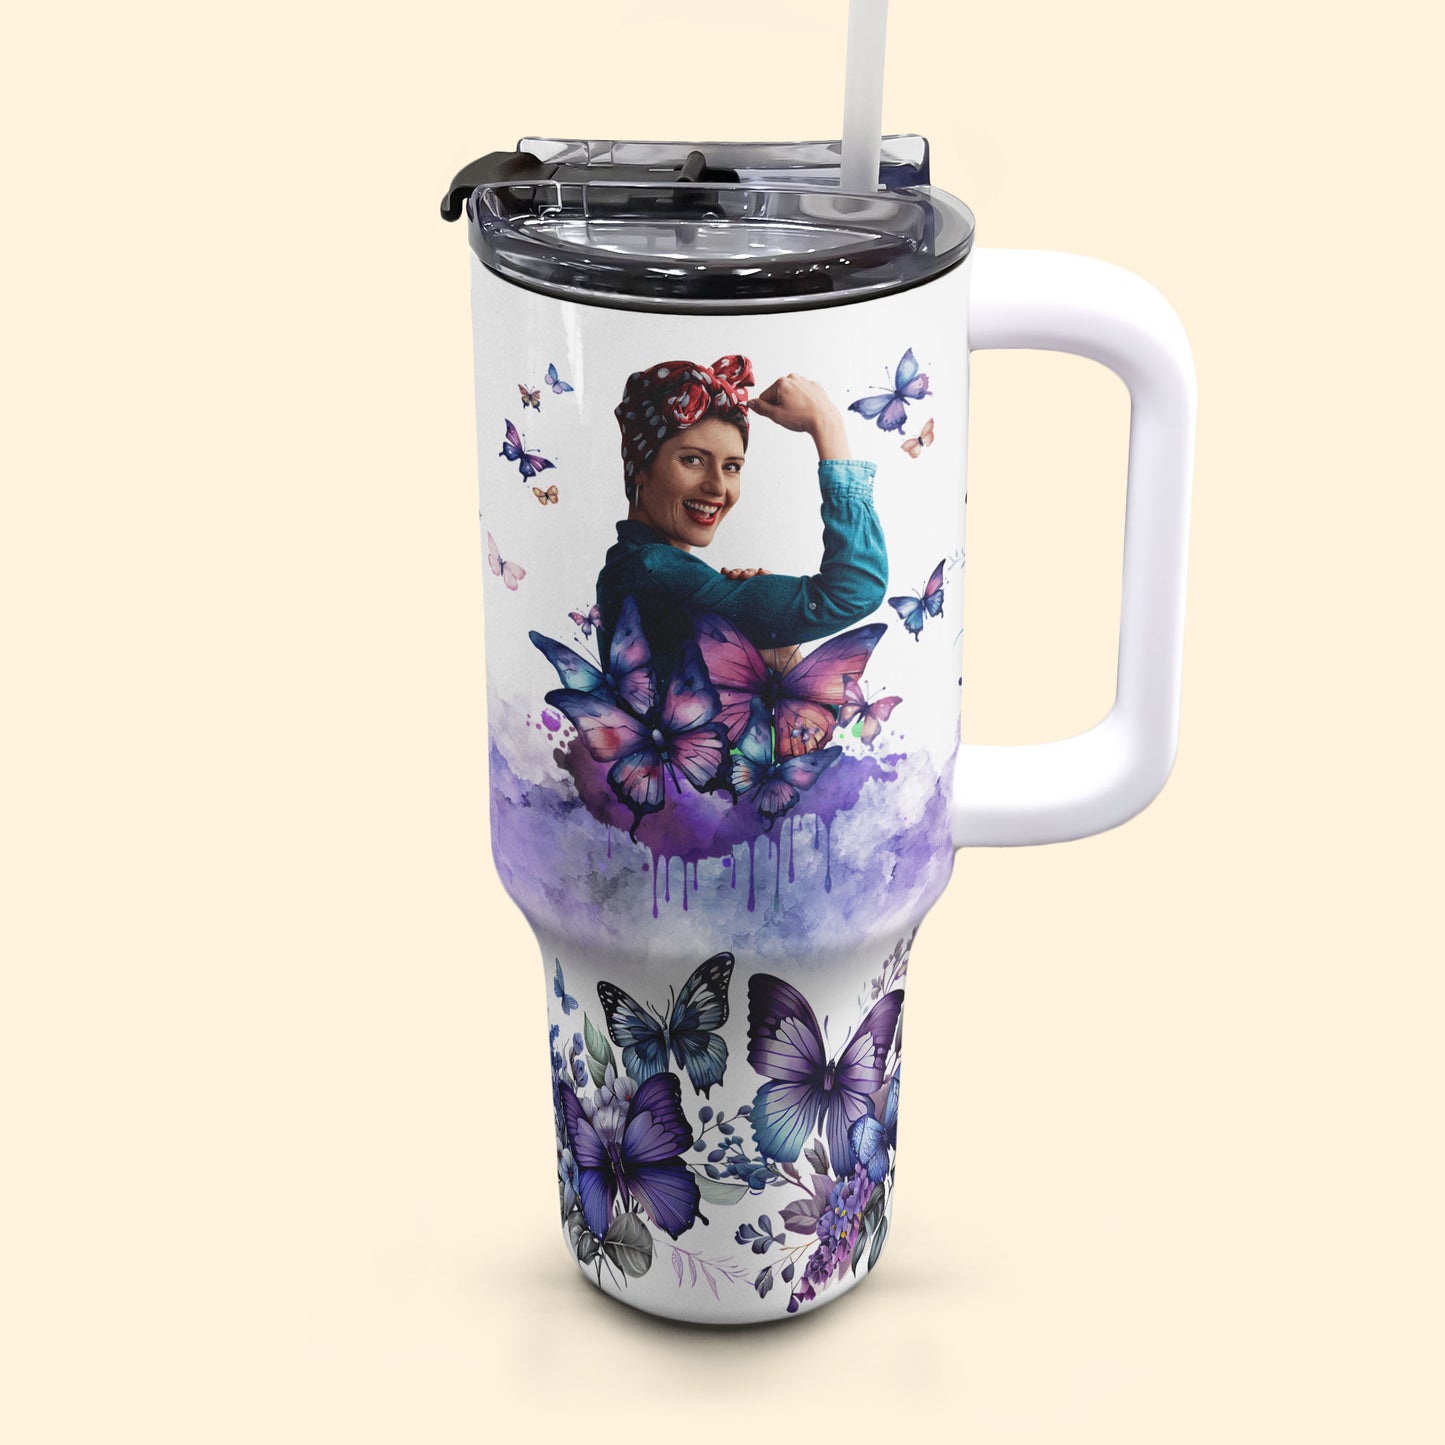 She Is Strong, Fearless, Warm Mom - Personalized Photo 40oz Tumbler With Straw